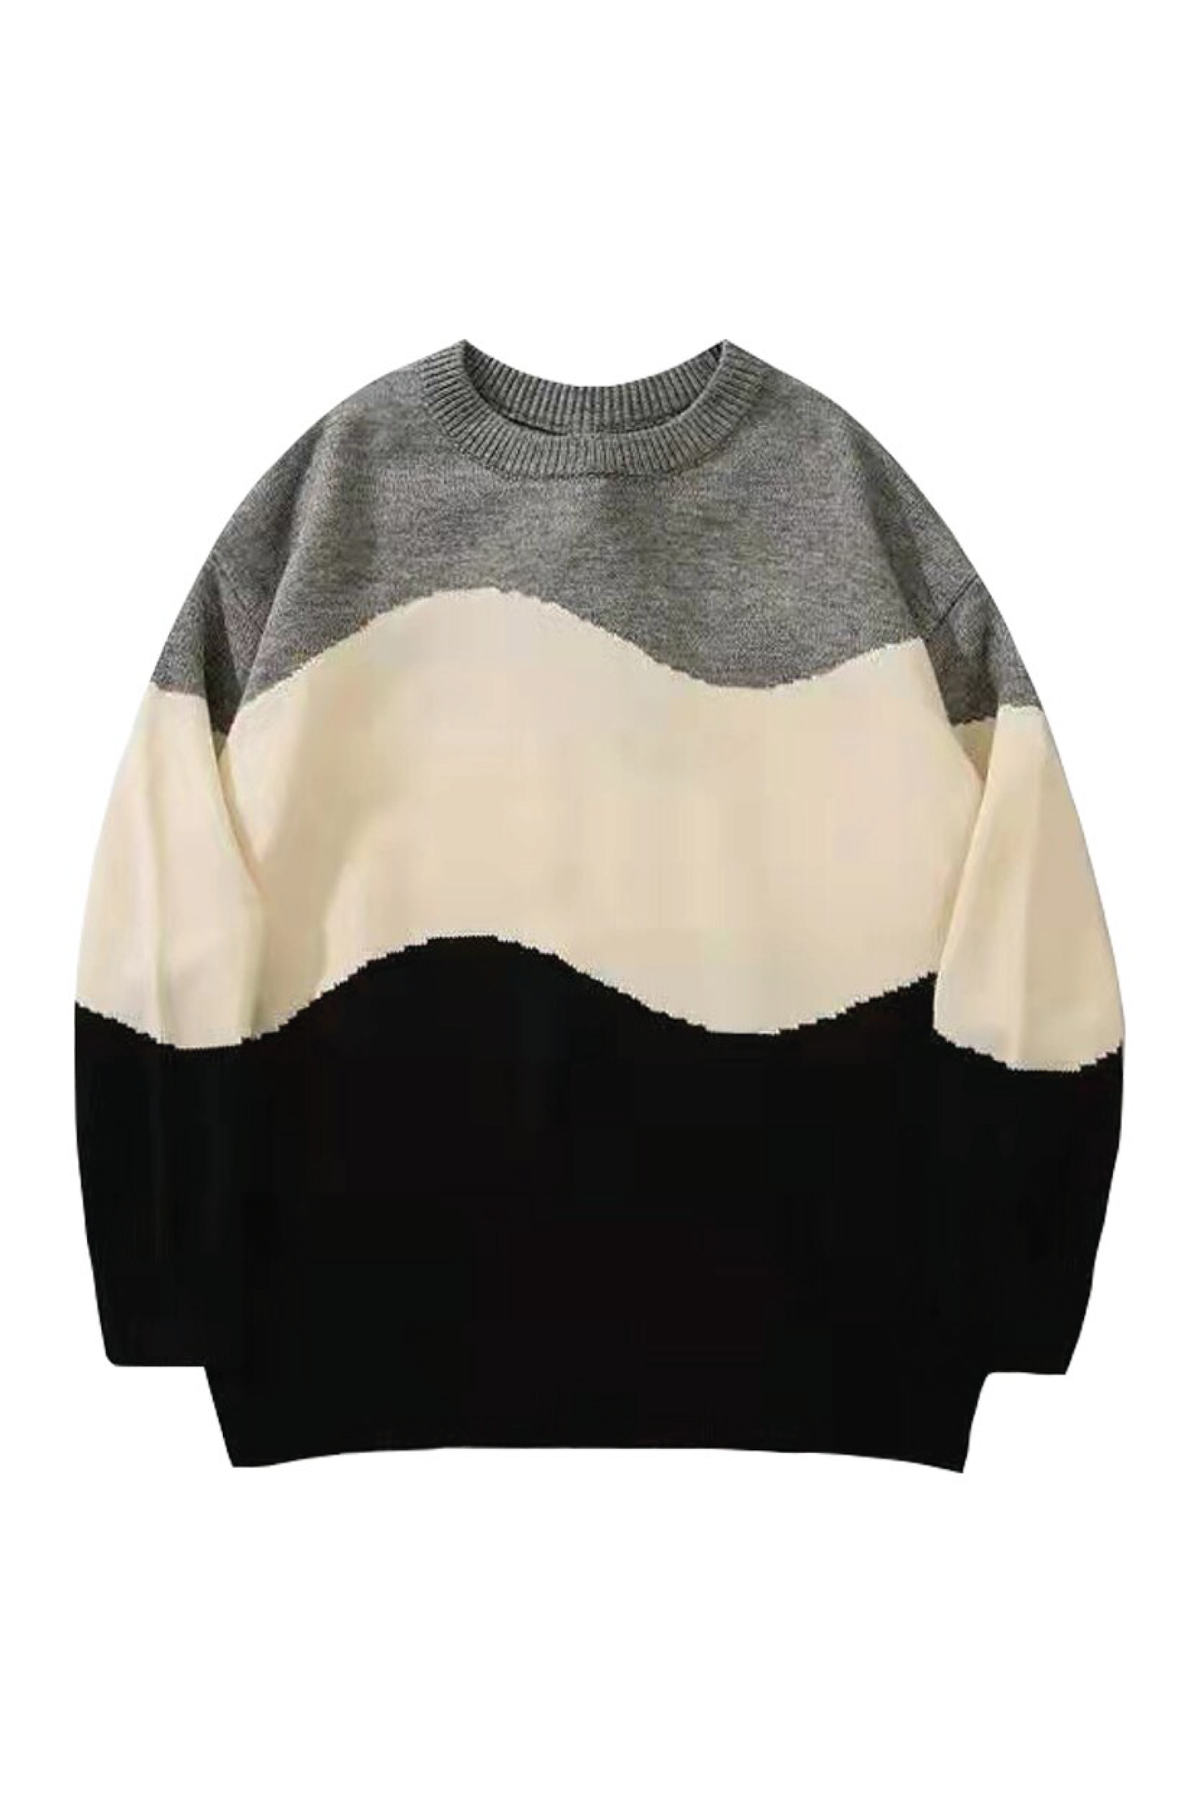 Fig and Spice Stripes Cashmere Men's Sweater | Hypoallergenic - Allergy Friendly - Naturally Free